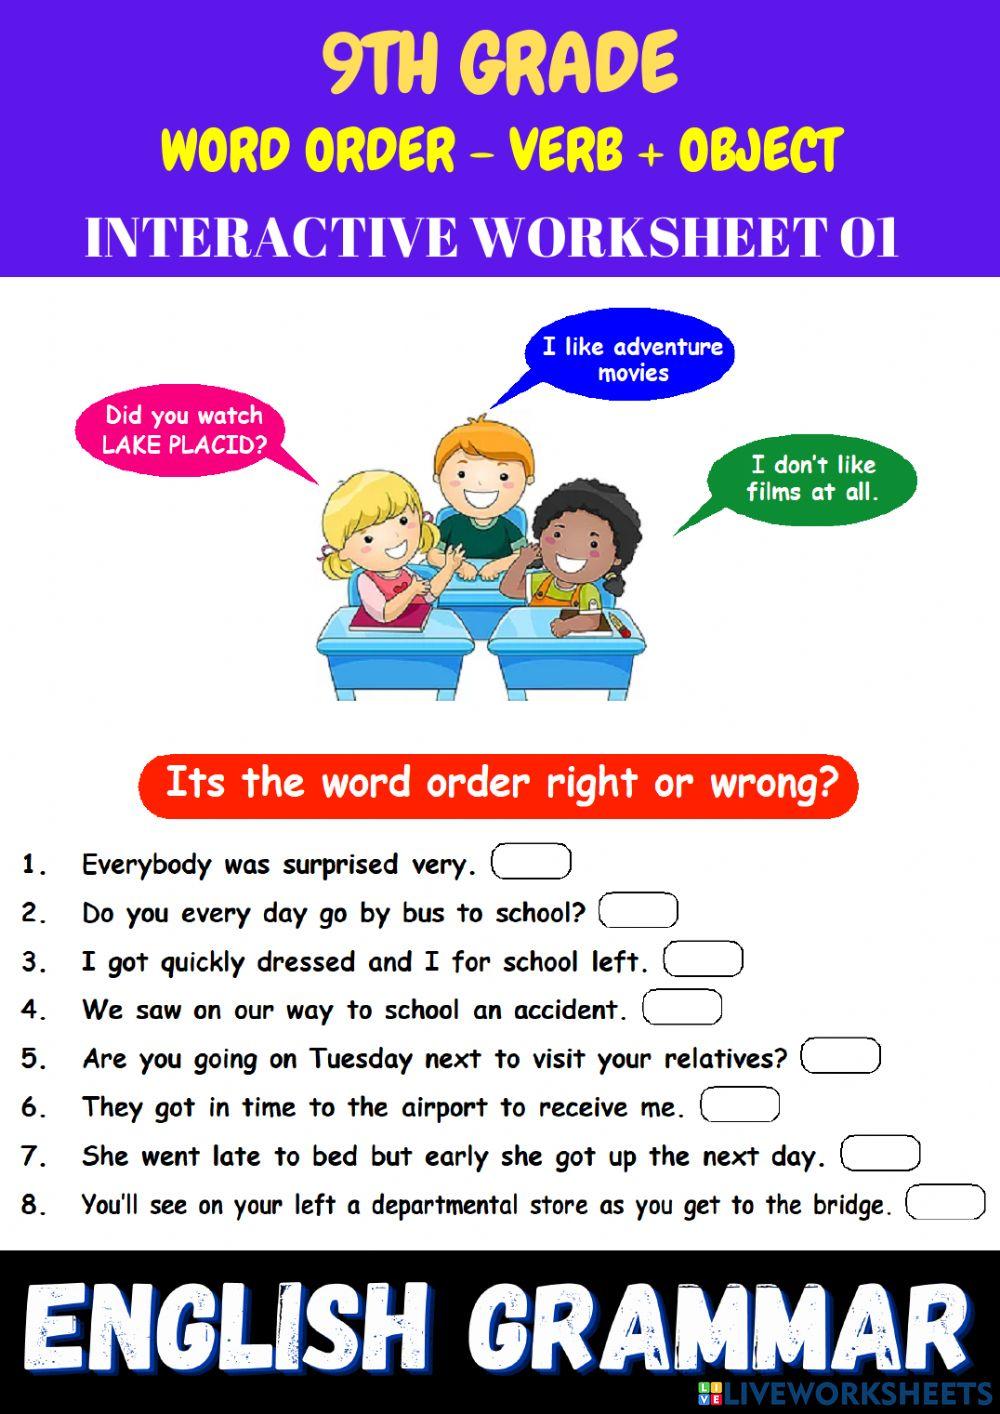 9th- eng - ps 01 - word order - verb + object